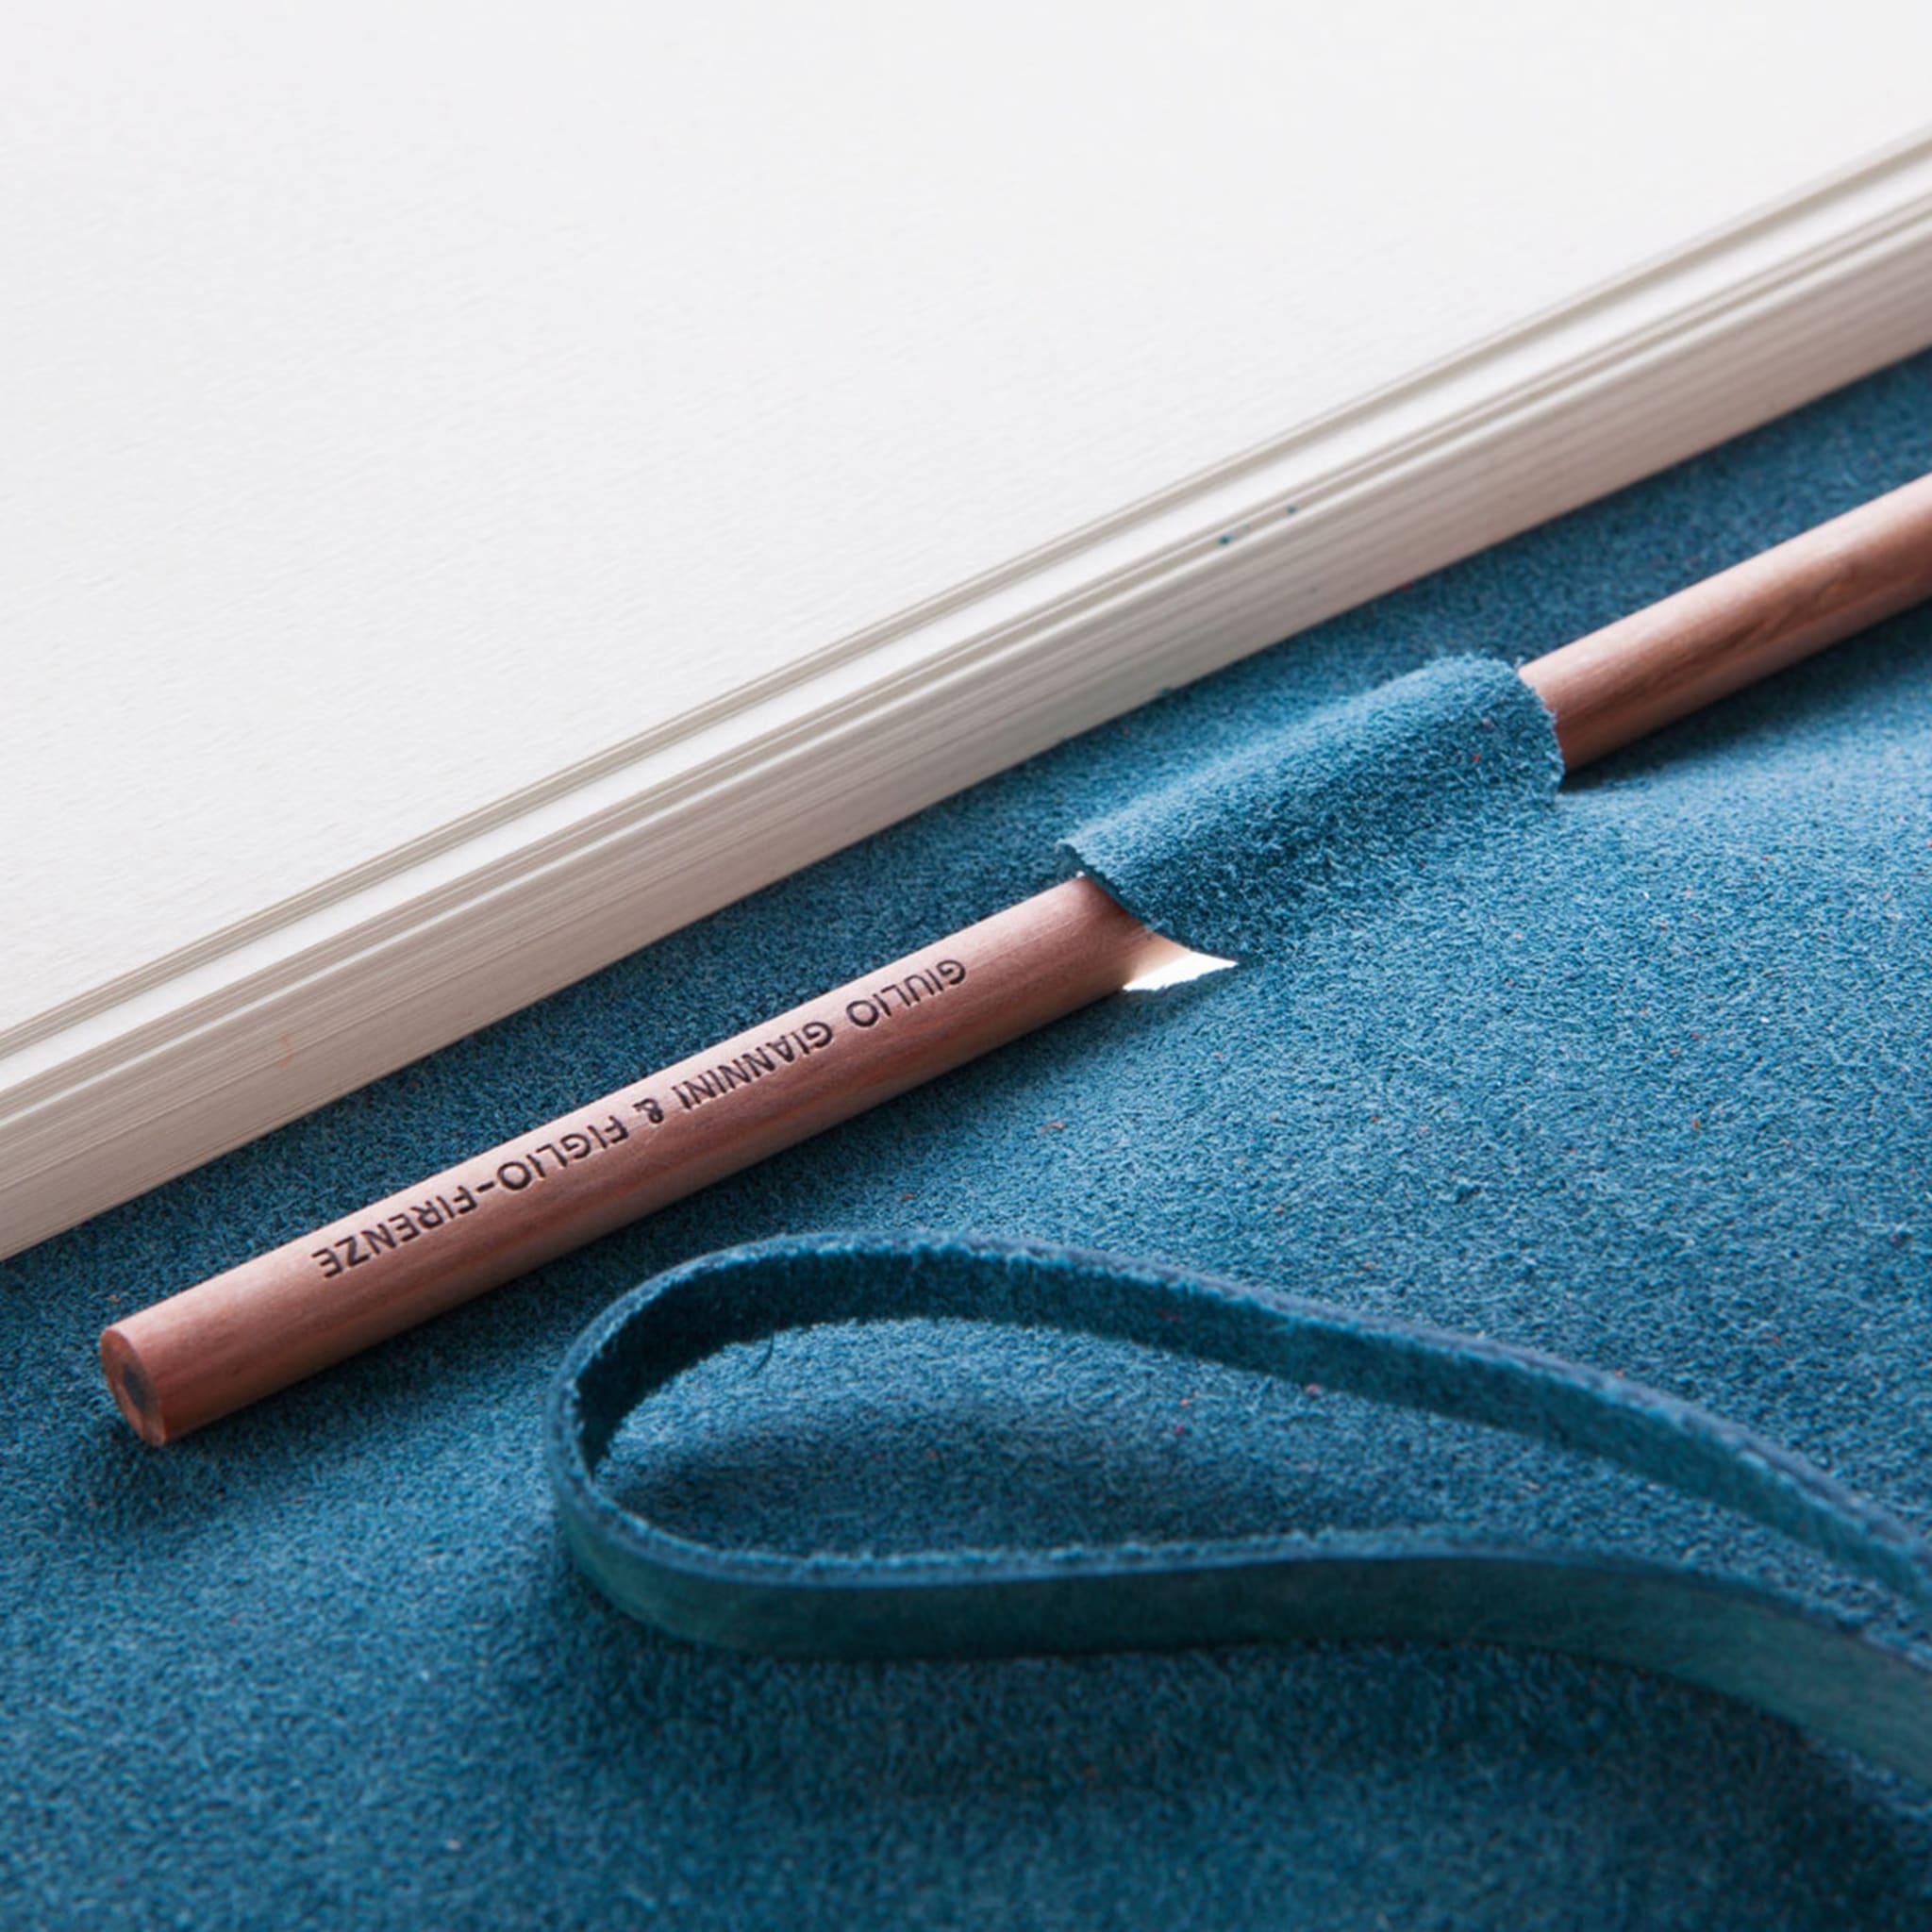 This is an elegant notebook bound in a debonair hue of blue leather by Florentine bookbinder atelier Giannini. The cover is made using the ancient technique of vegetable tanning, and the plain ivory parchment paper within is fastened by a leather